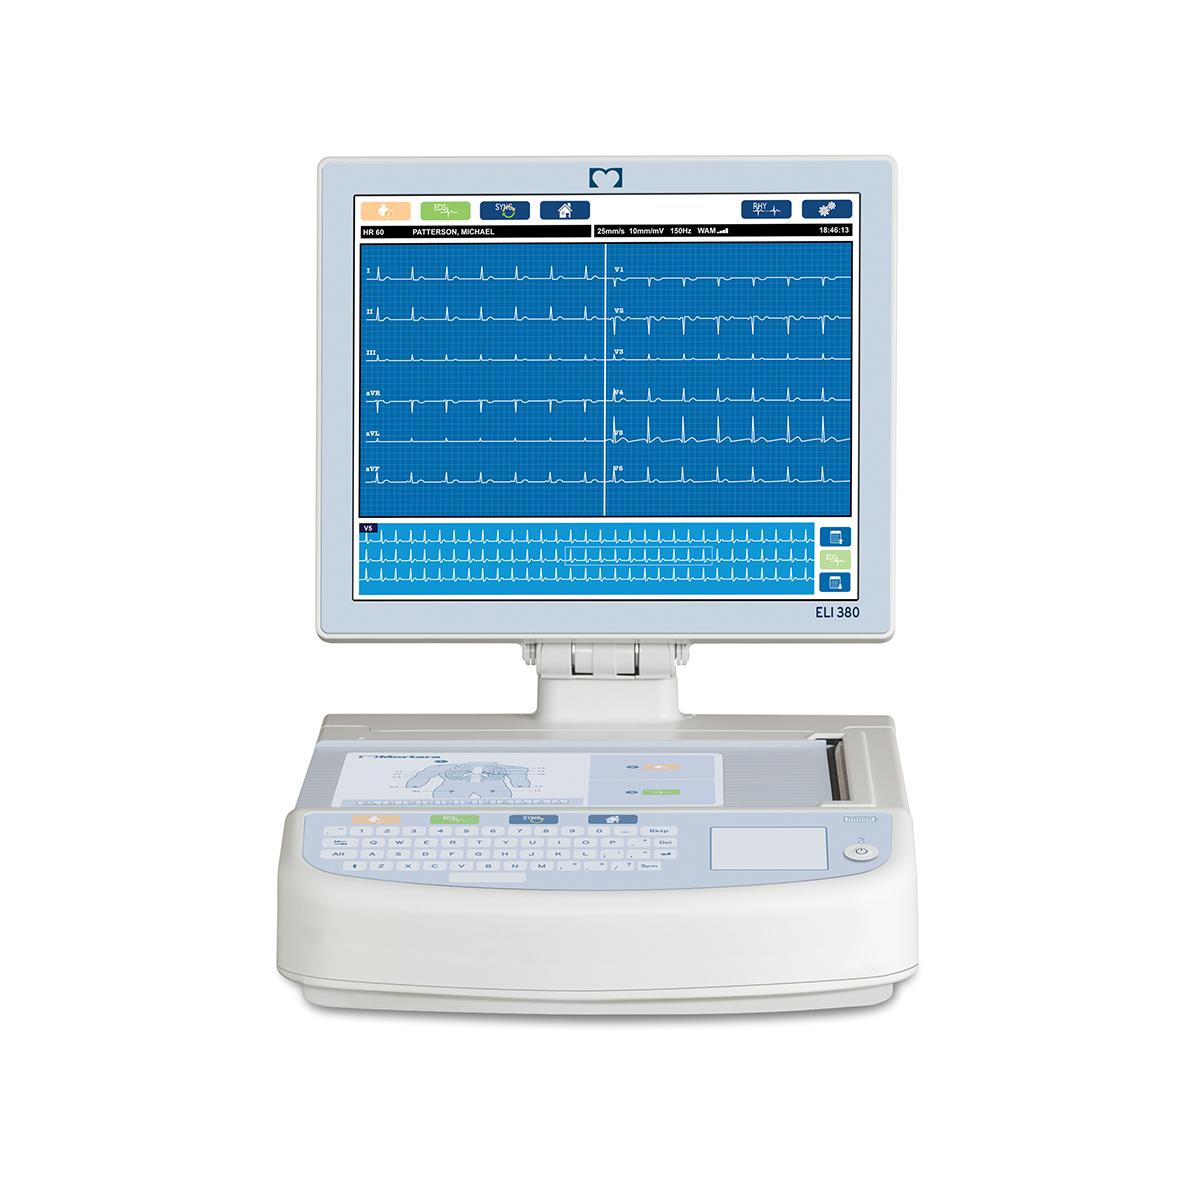 ELI 380 Resting Electrocardiograph, previously branded as Welch Allyn, Mortara and Burdick, is now a Baxter diagnostic cardiology device, showing a front view